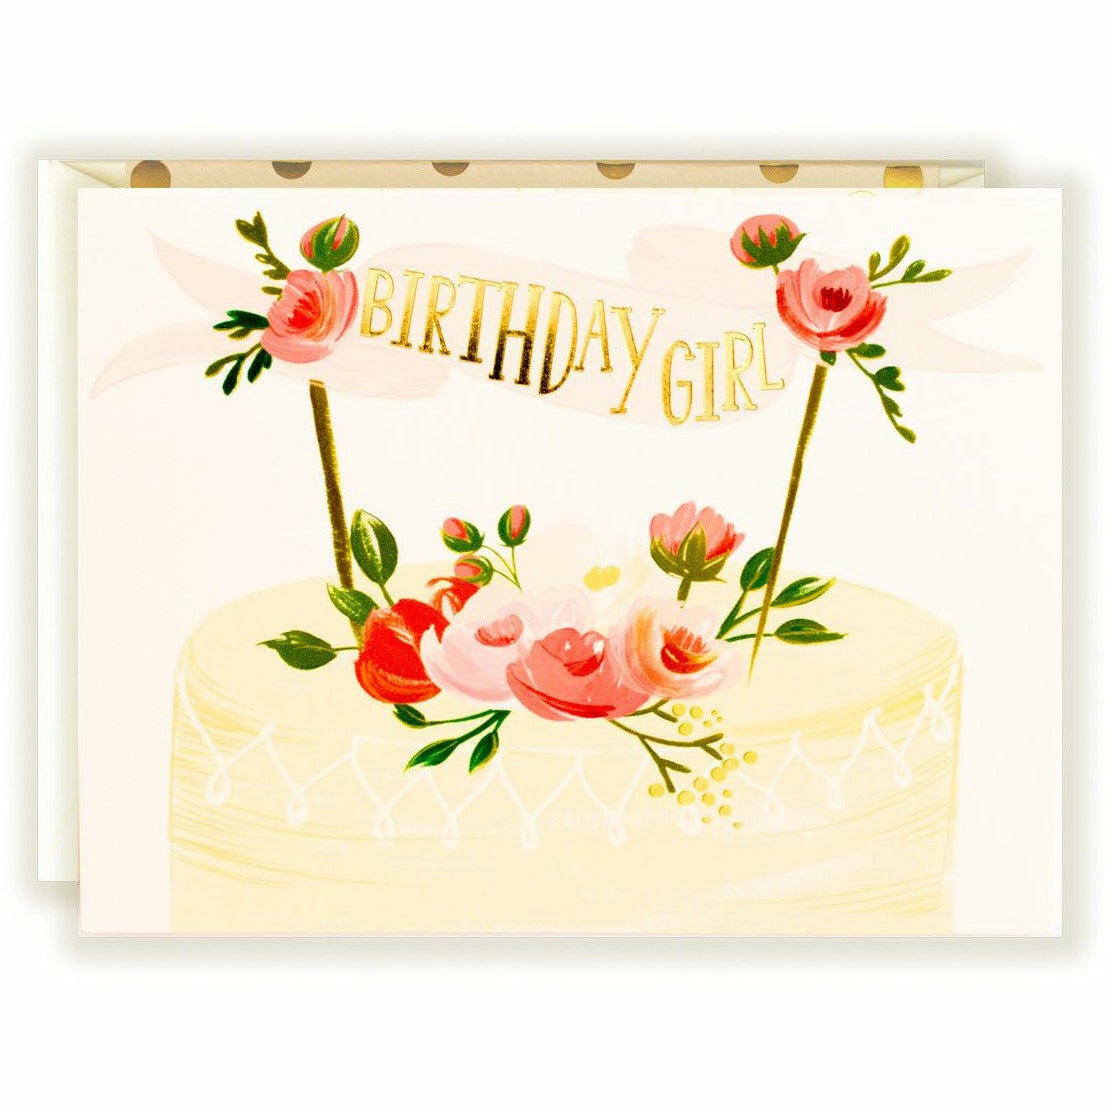 Birthday Girl Cake Card - The First Snow